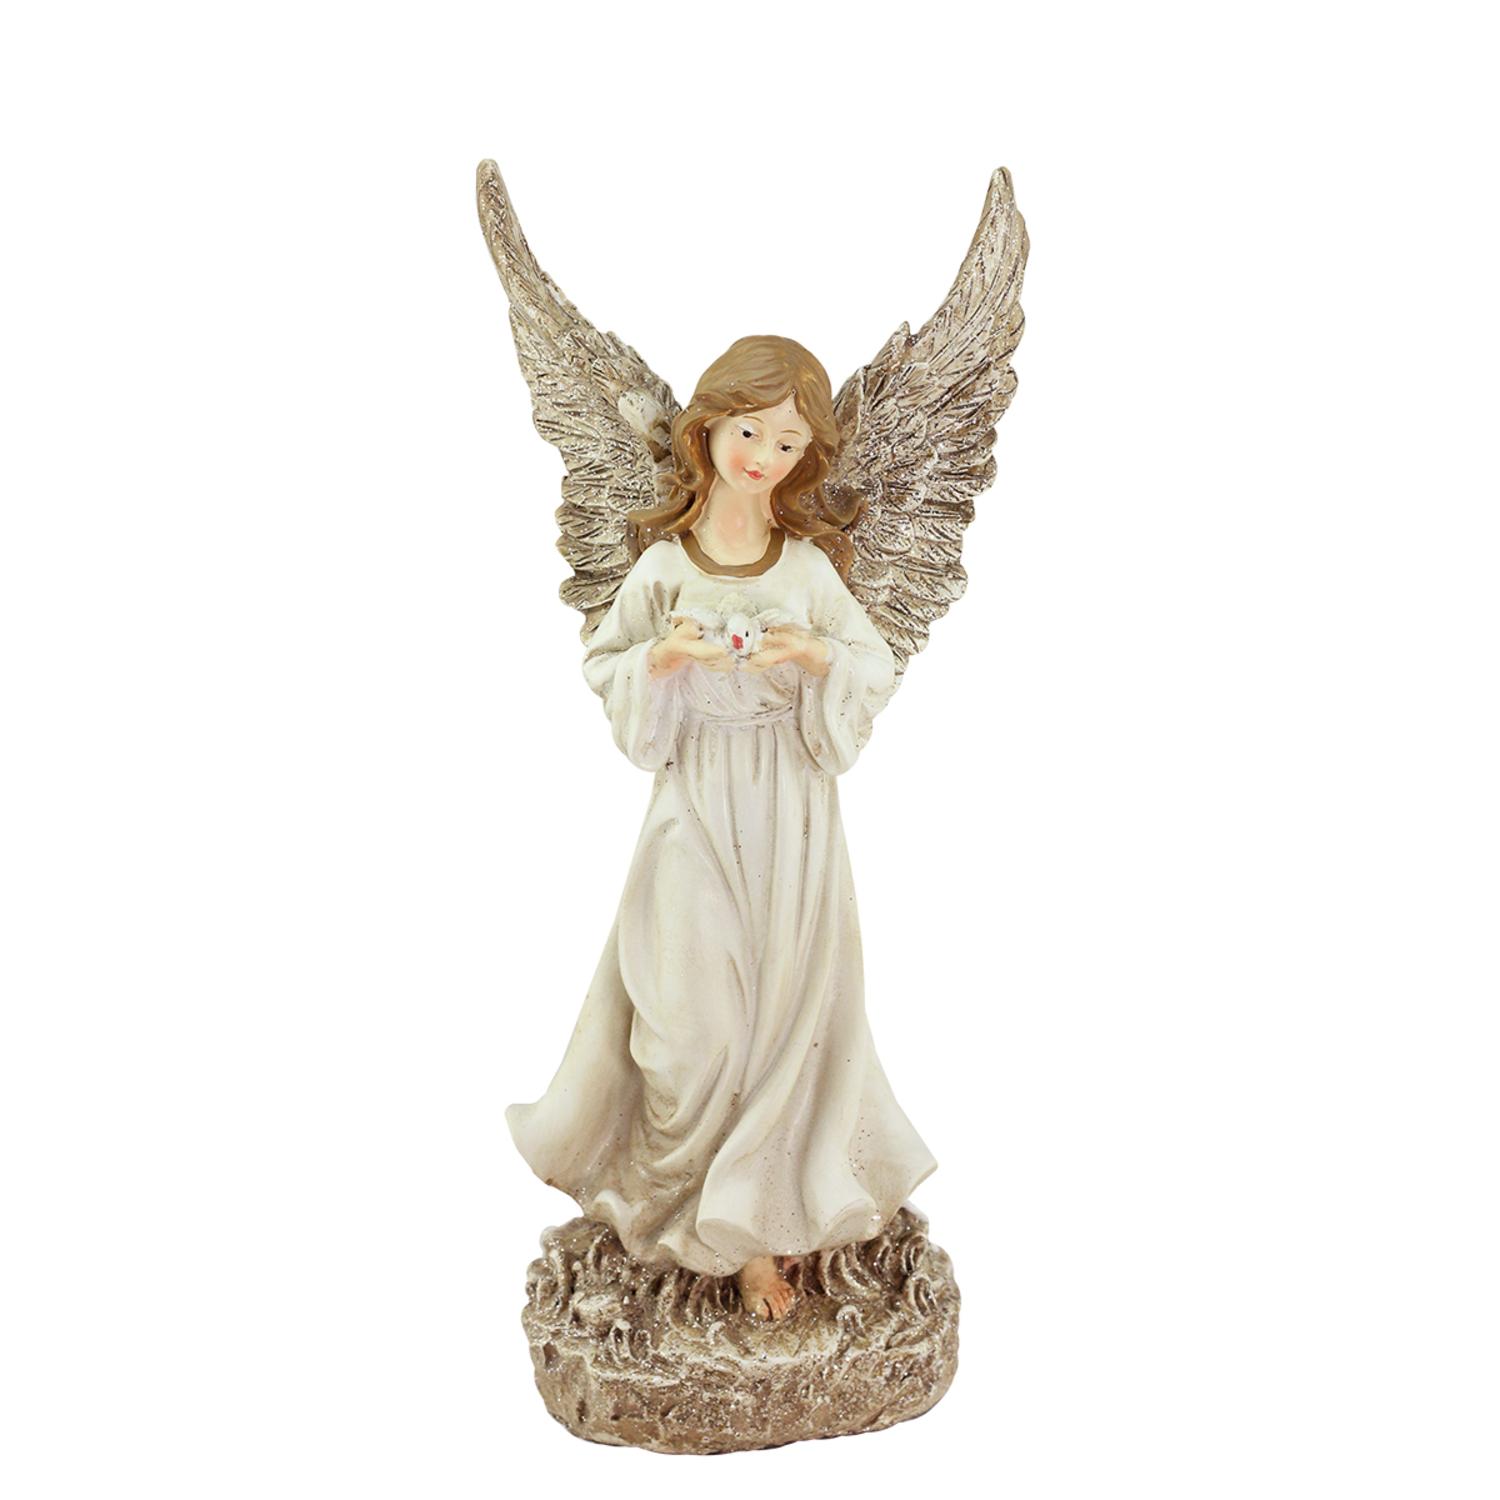 Northlight 12.5" Heavenly Gardens Glittered Ivory & Champagne Gold Serene Angel w/ Dove Outdoor Patio Garden Statue - image 1 of 1